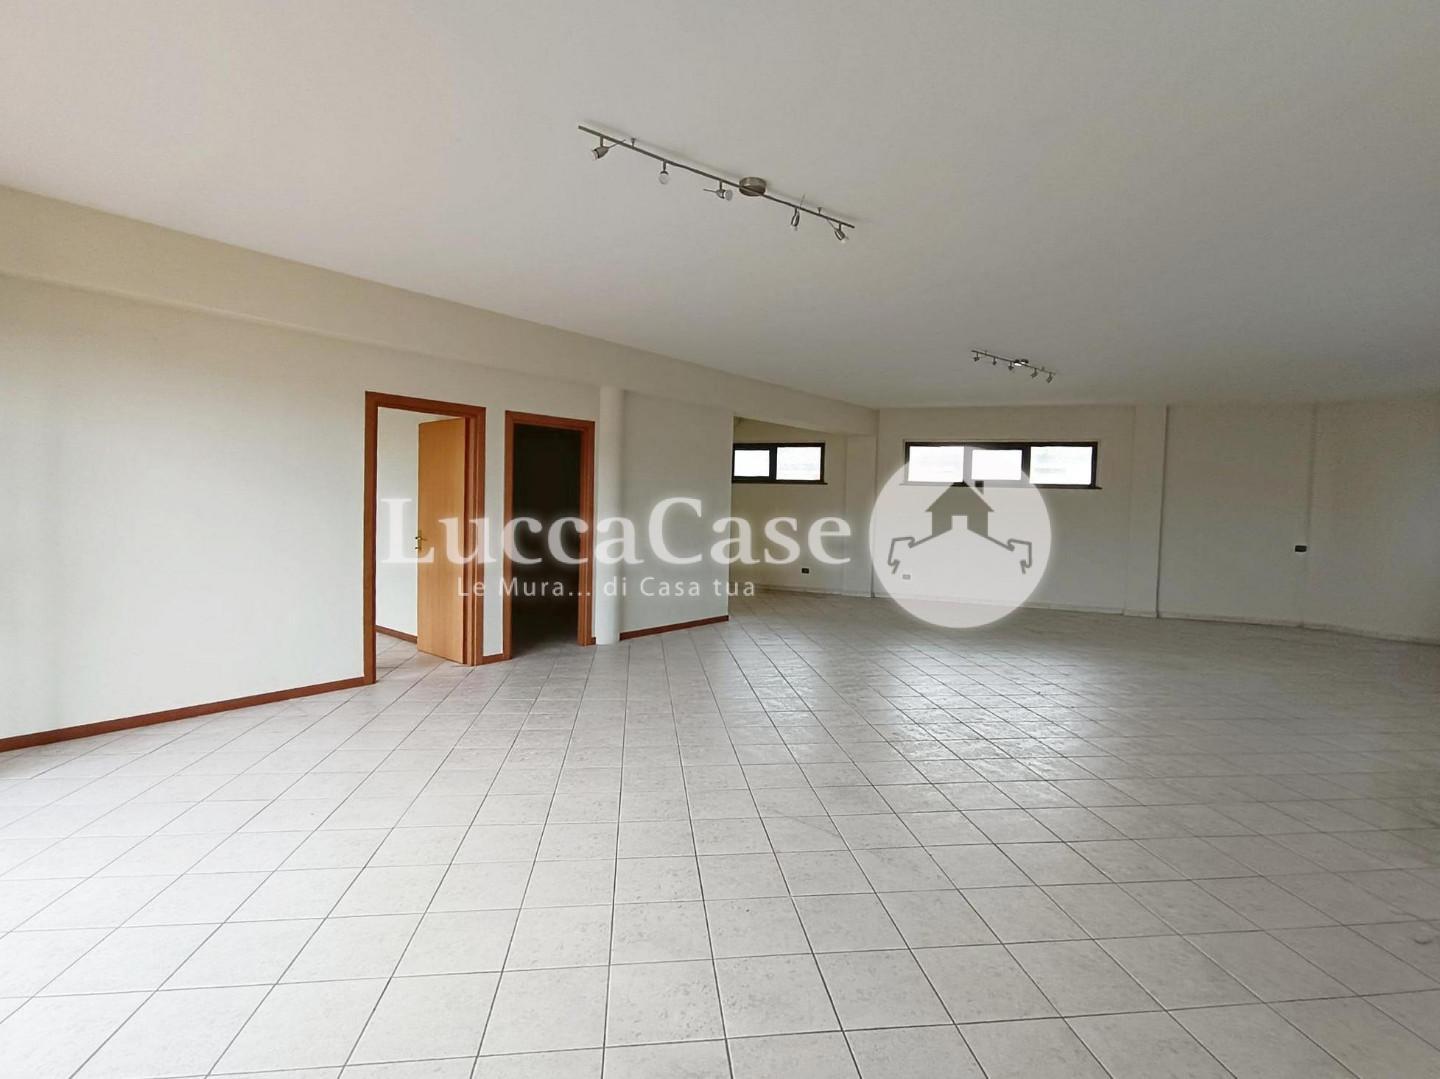 Office for commercial rentals in Porcari (LU)